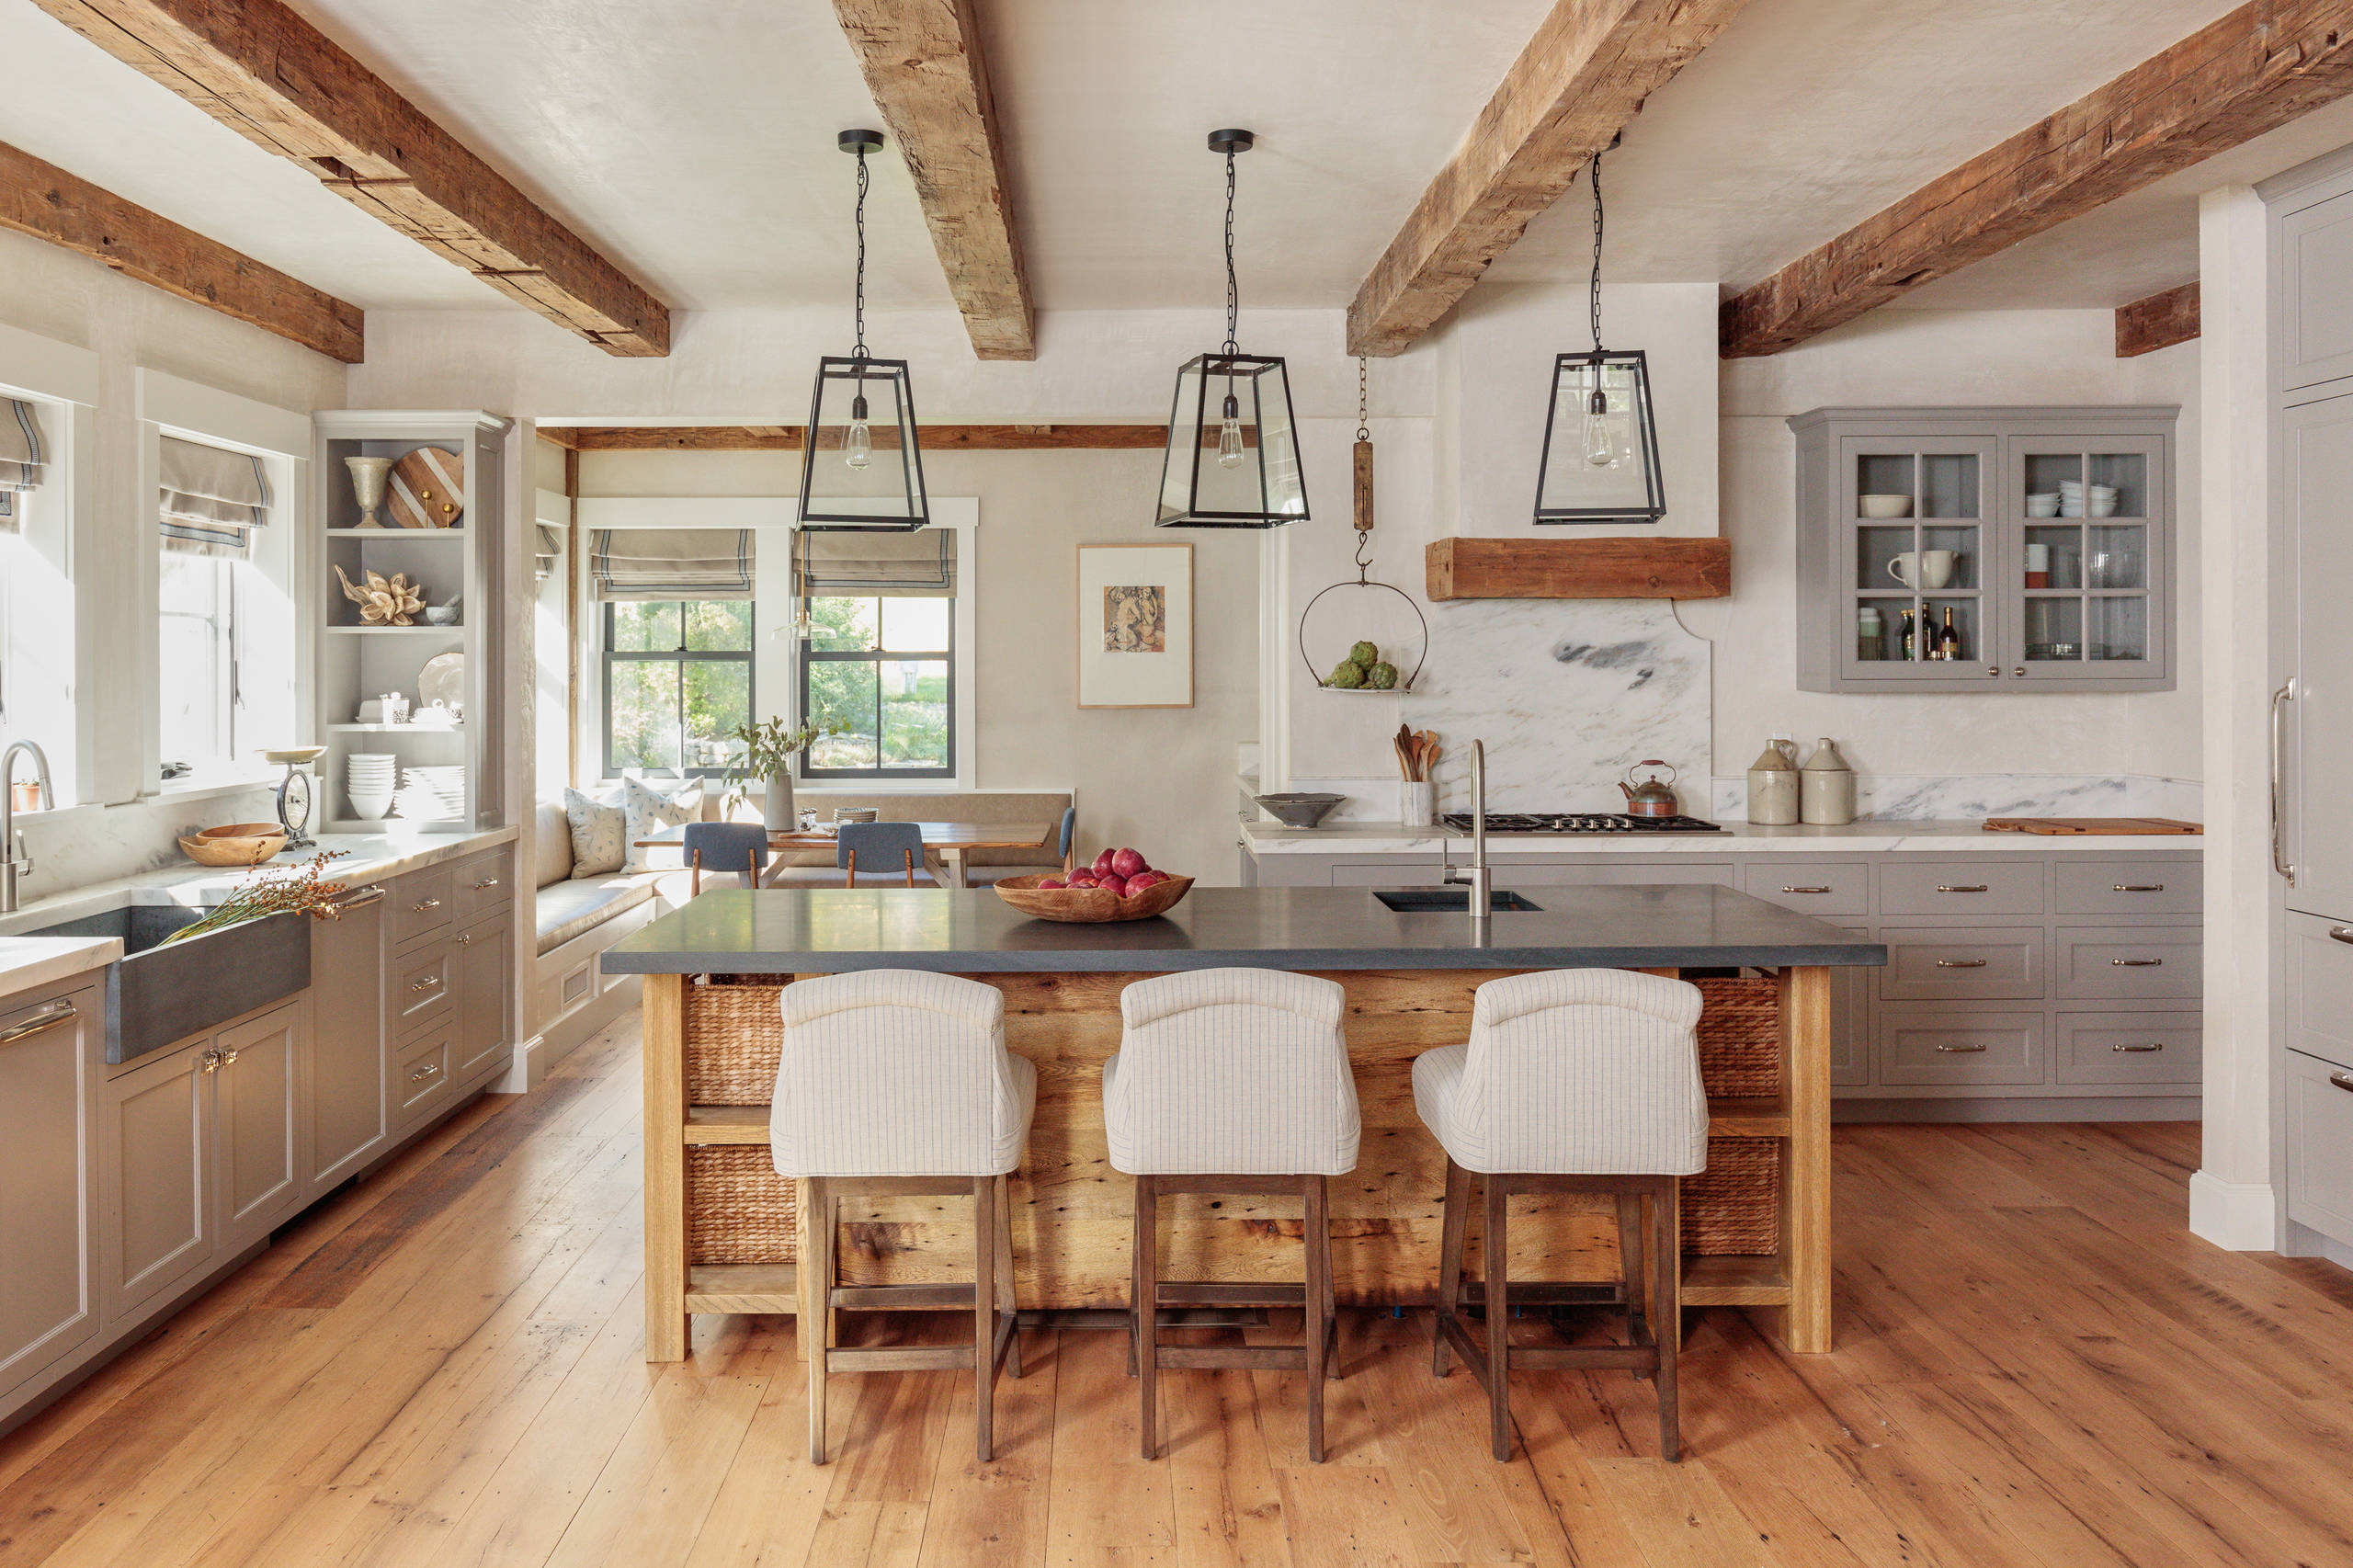 How to achieve a farmhouse kitchen look – the materials and